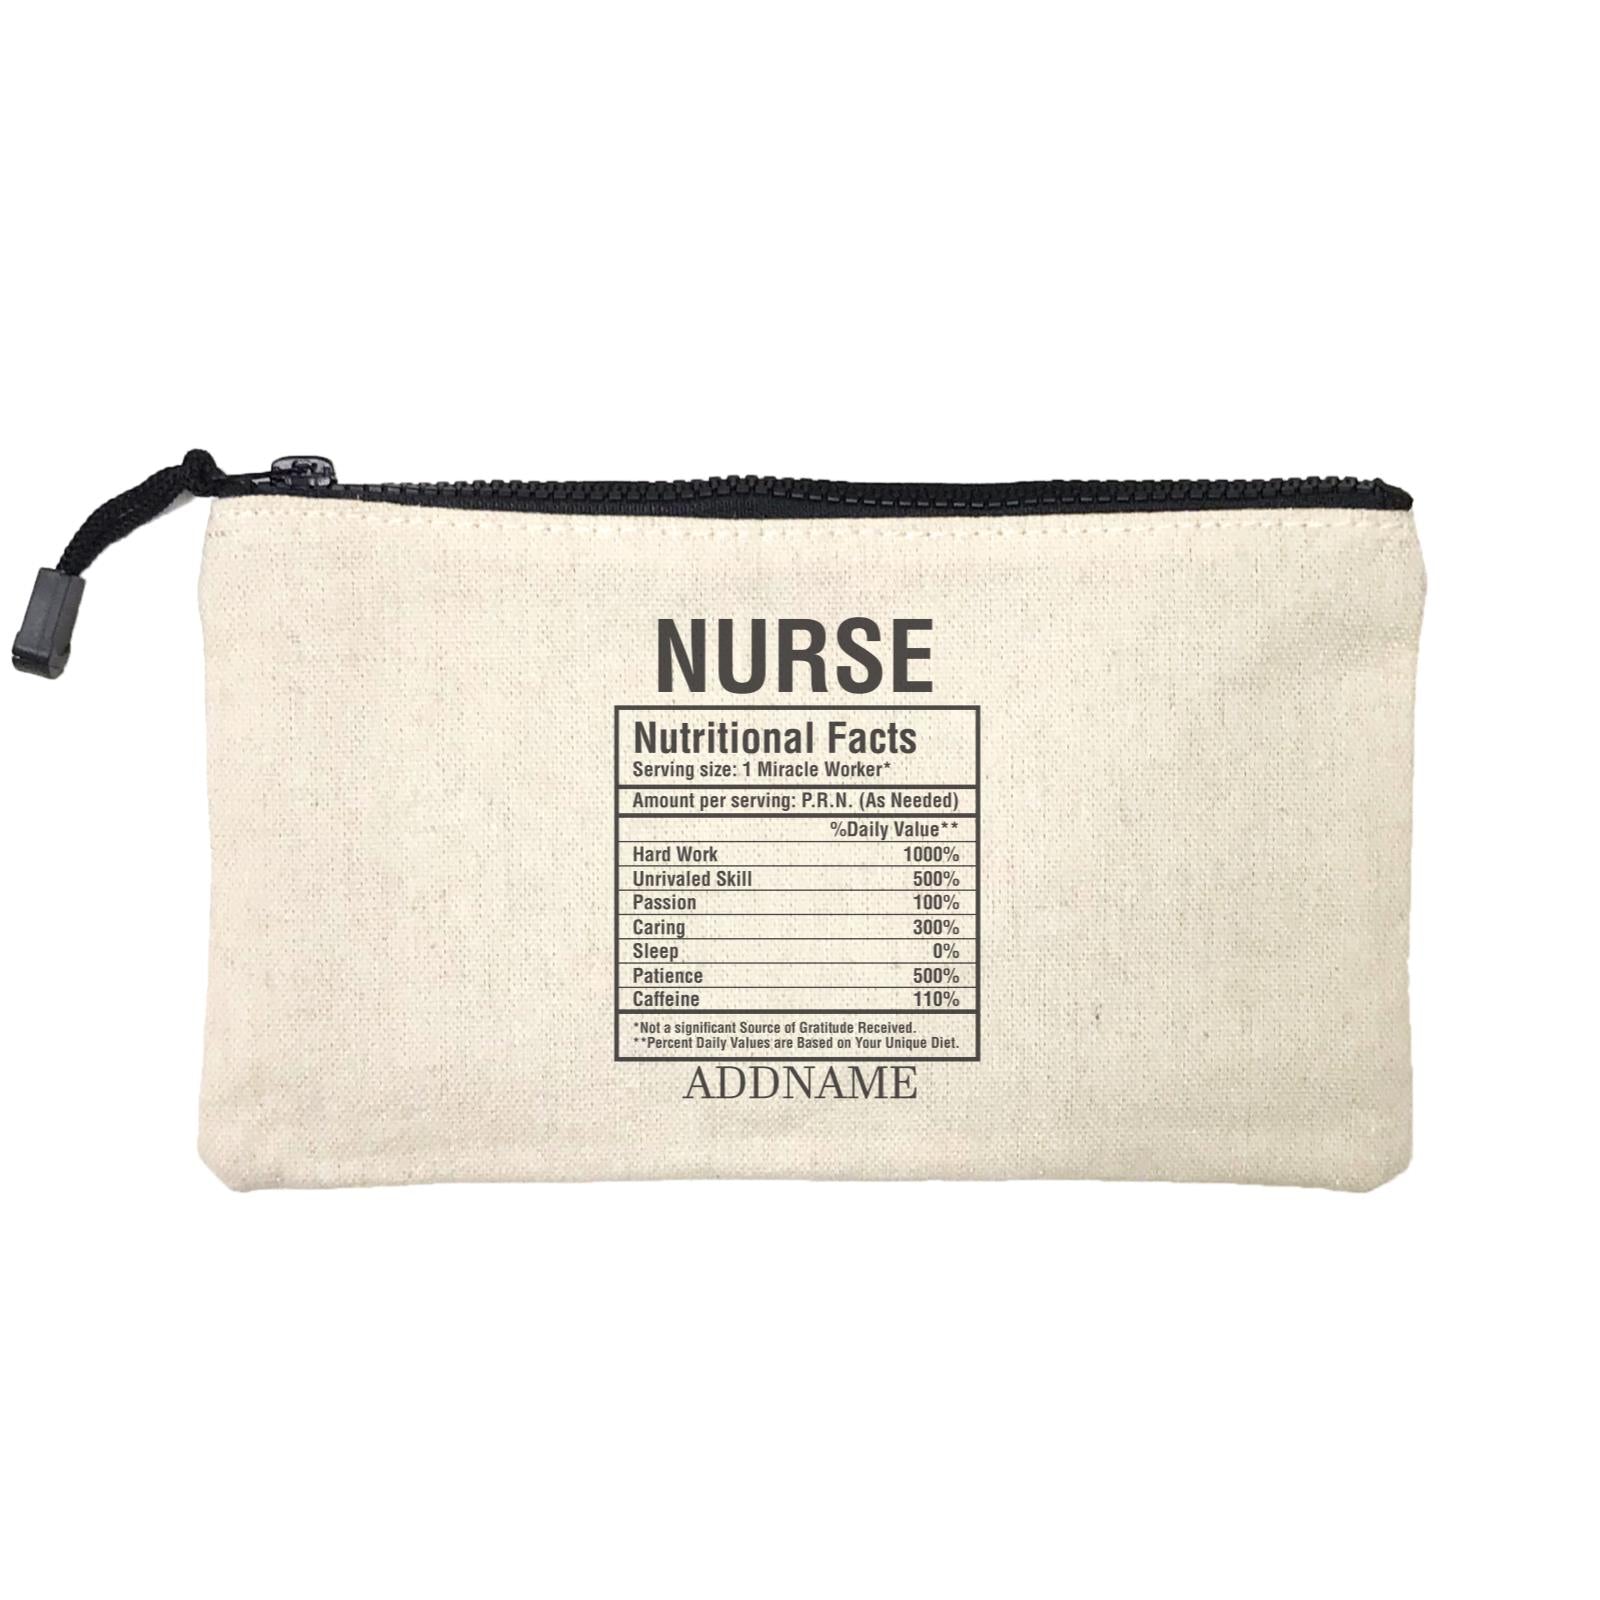 Nurse Nutritional Facts Mini Accessories Stationery Pouch